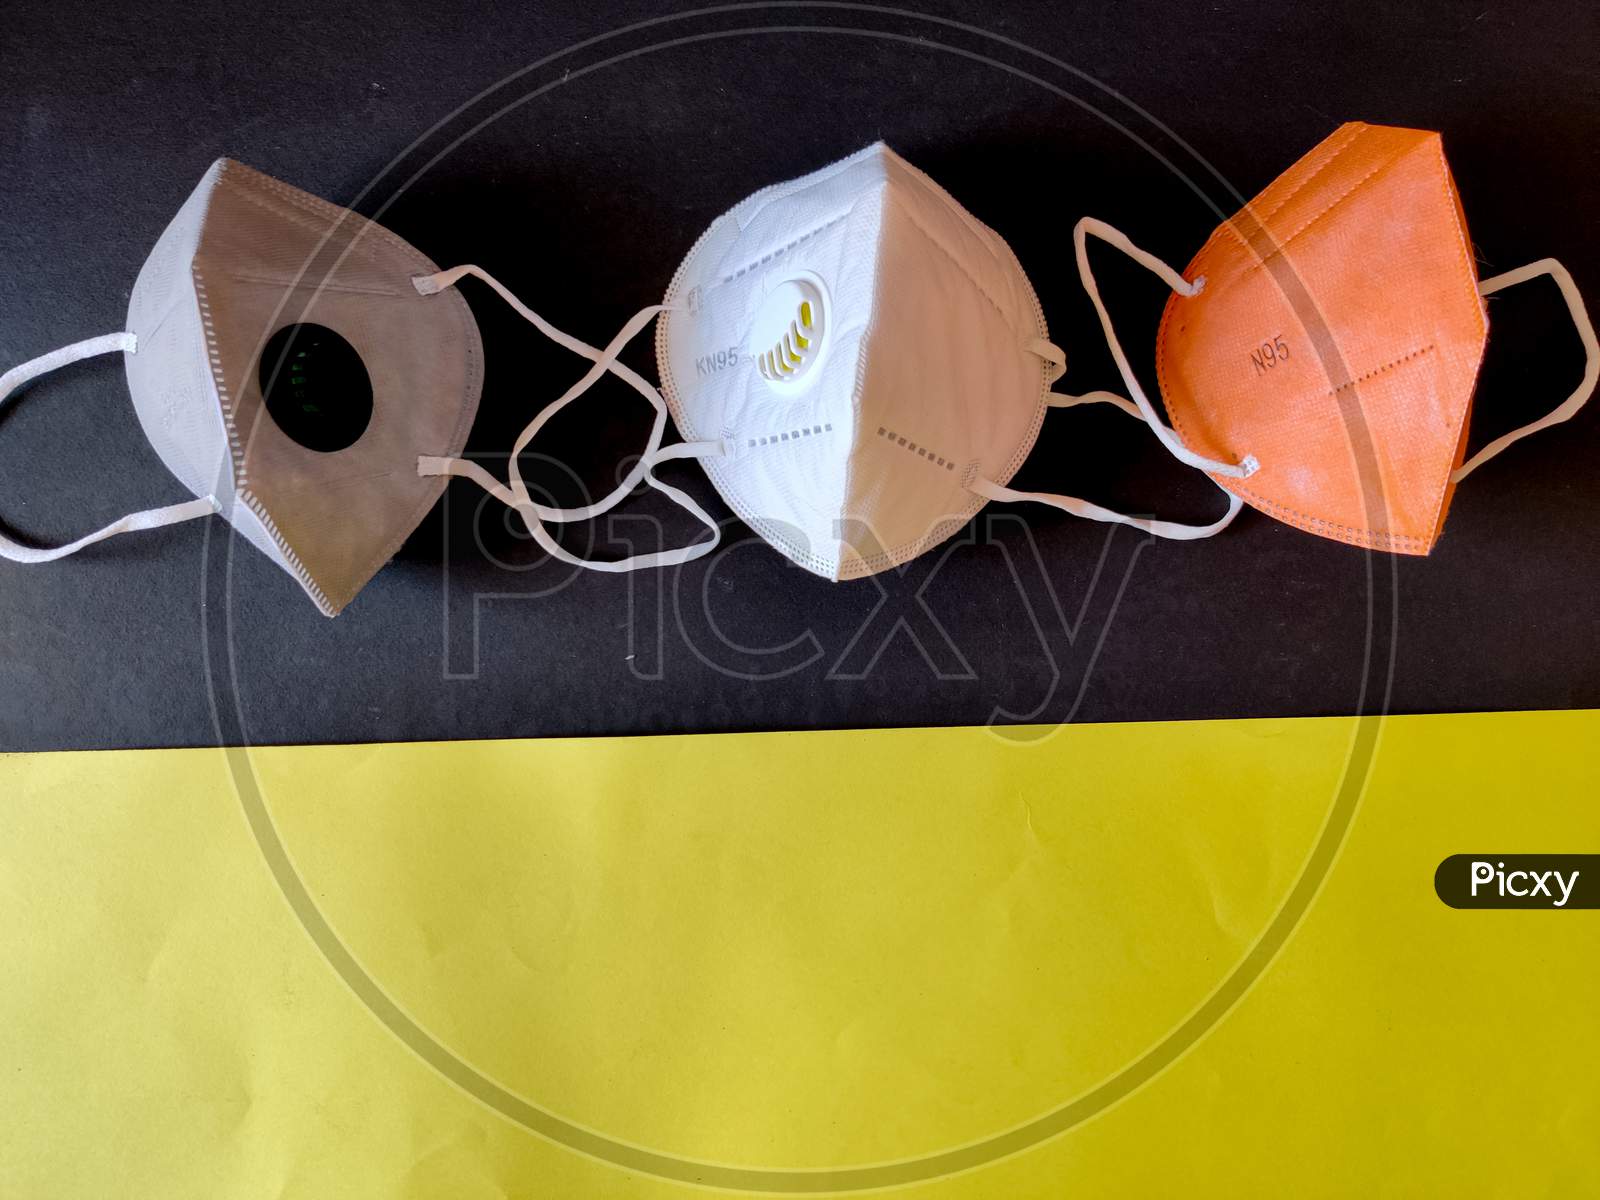 Three Kn-95 Face Masks In White,Grey And Orange Color. Isolated On Black And Yellow Background. Protection From Coronavirus Or Covid-19. Copy Space.Top View